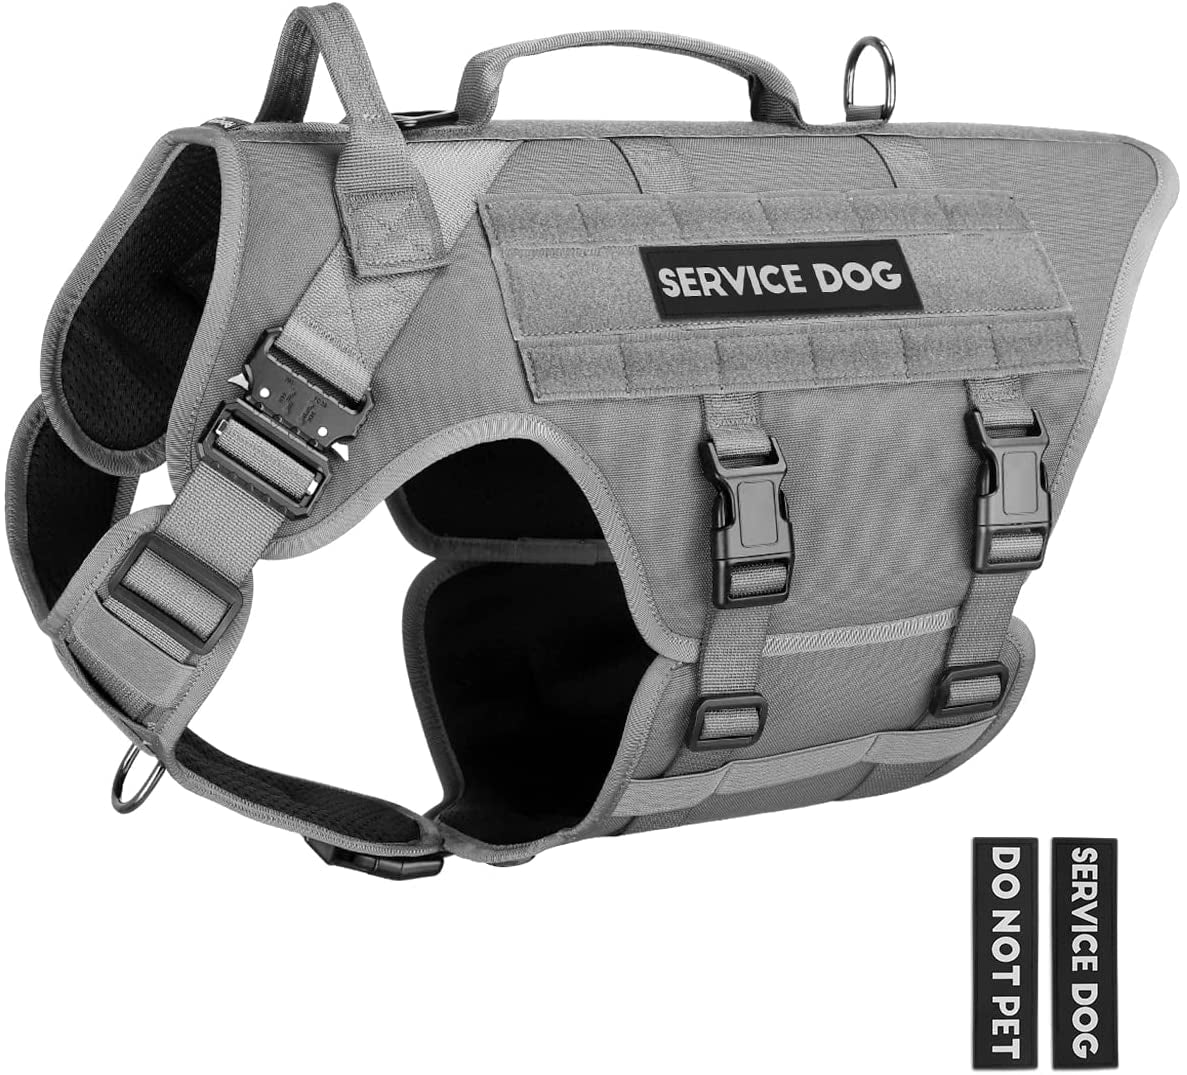 Tactical Dog Harness - PETNANNY Service Dog Vest for Large Dogs Fully Body Coverage in Training Dog Harness with 2 Reflective Dog Patches, Handle, Hook and Loop Panels, Walking Hunting Dog MOLLE Vest Animals & Pet Supplies > Pet Supplies > Dog Supplies > Dog Apparel PETNANNY Grey XL 